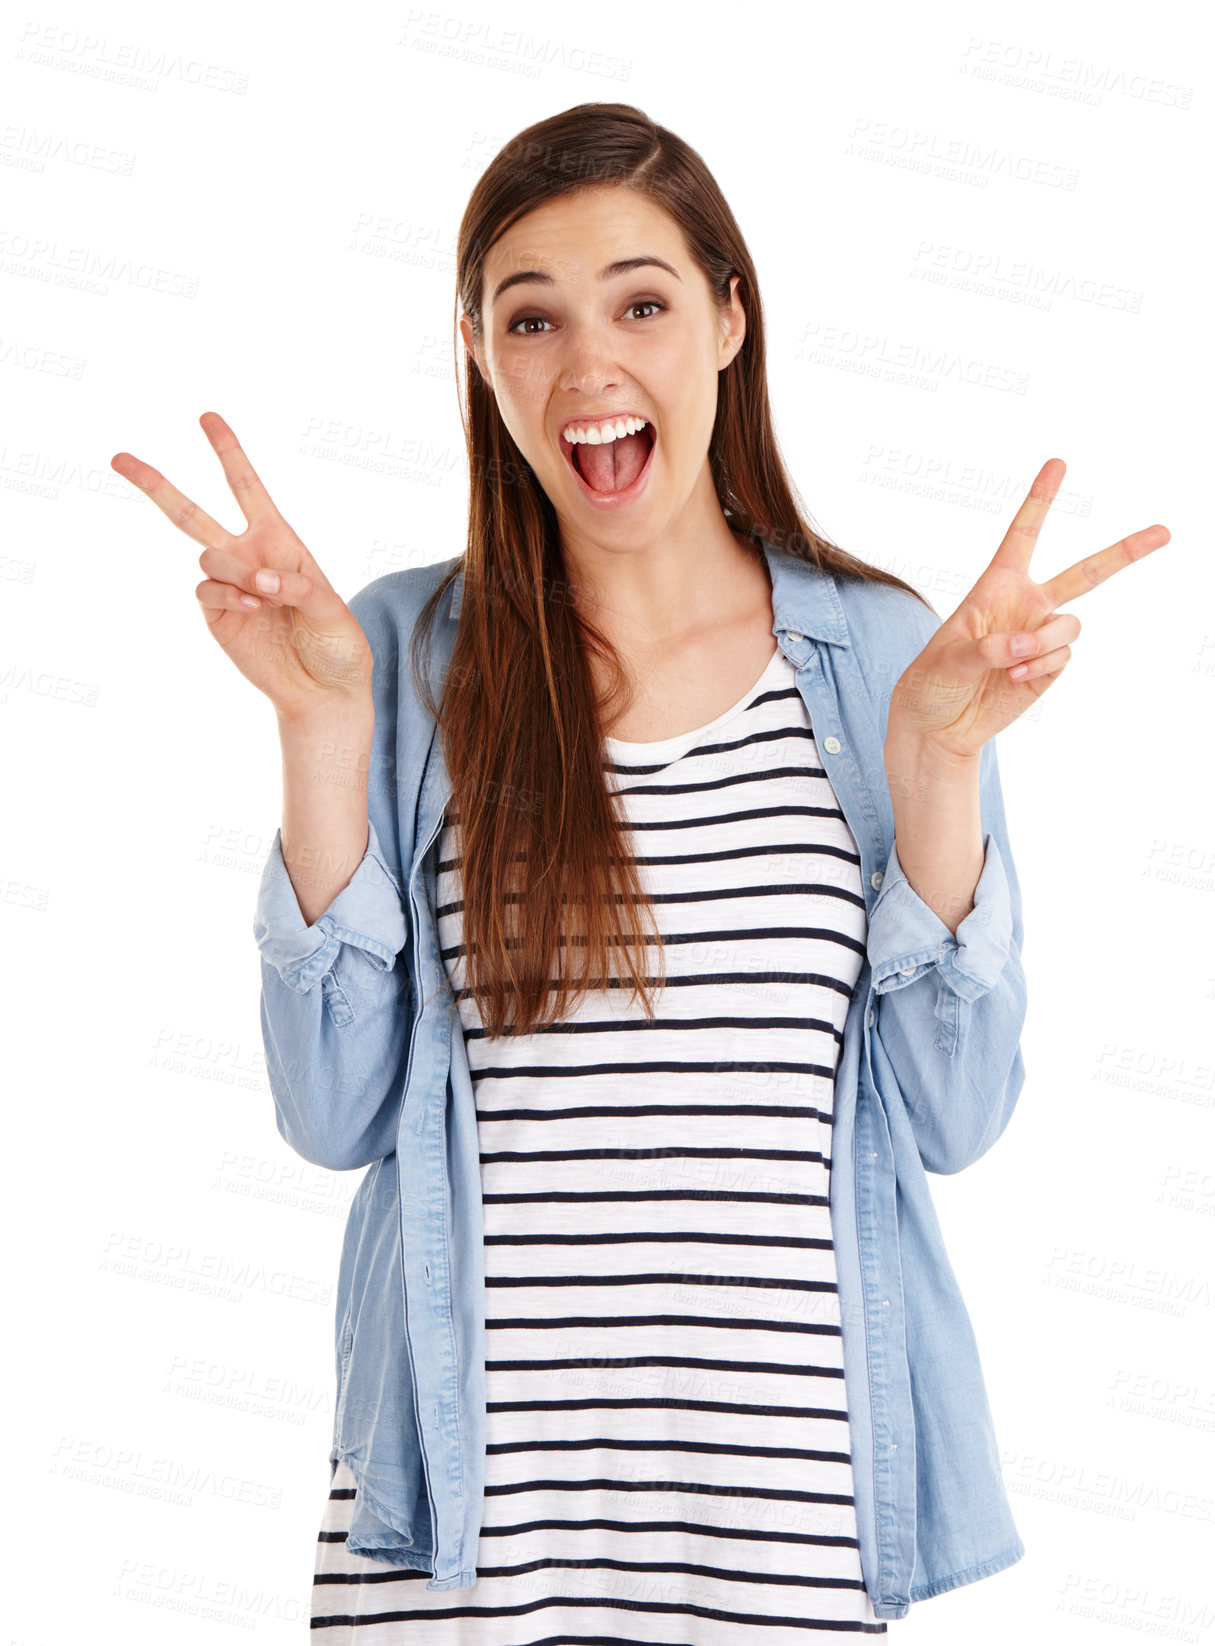 Buy stock photo Studio shot of a beautiful young woman giving you the peace sign against a white background 